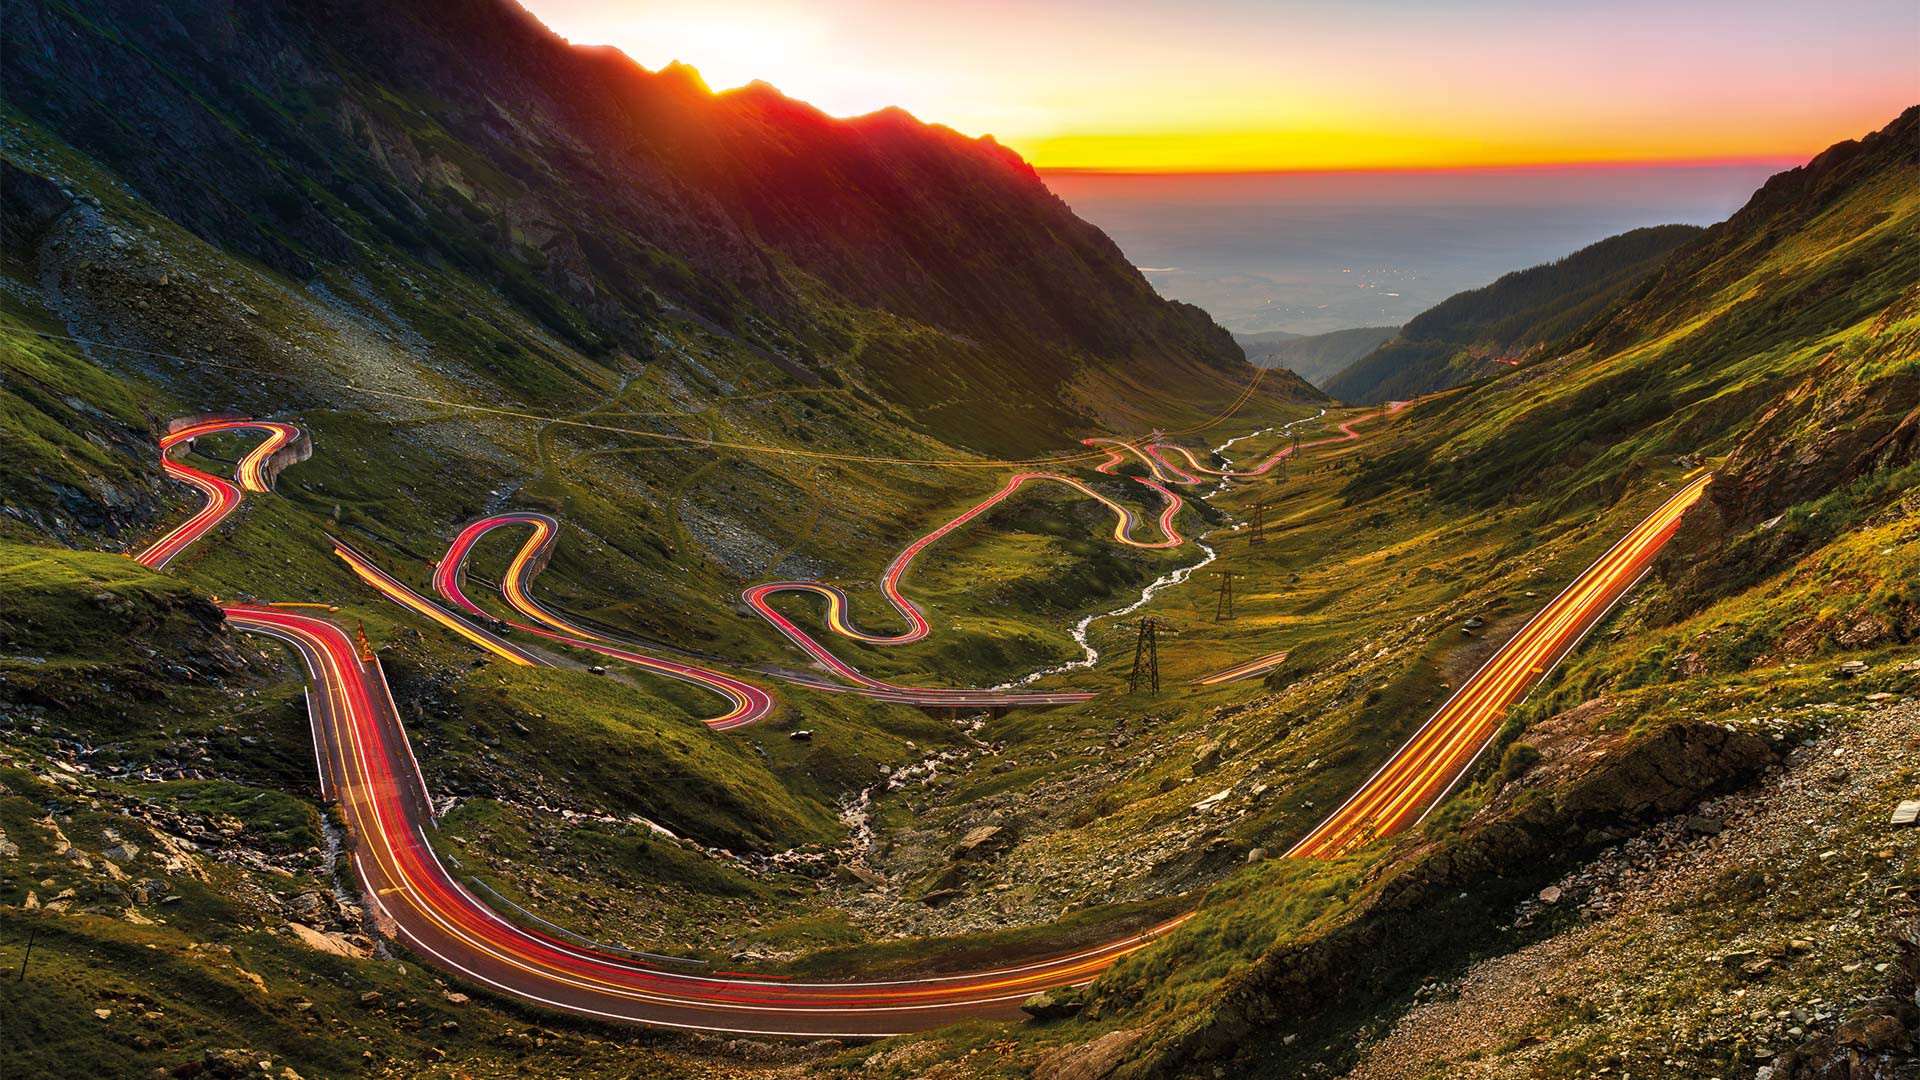 Traffic light trails on windy mountain roads leading towards the sea and sunset